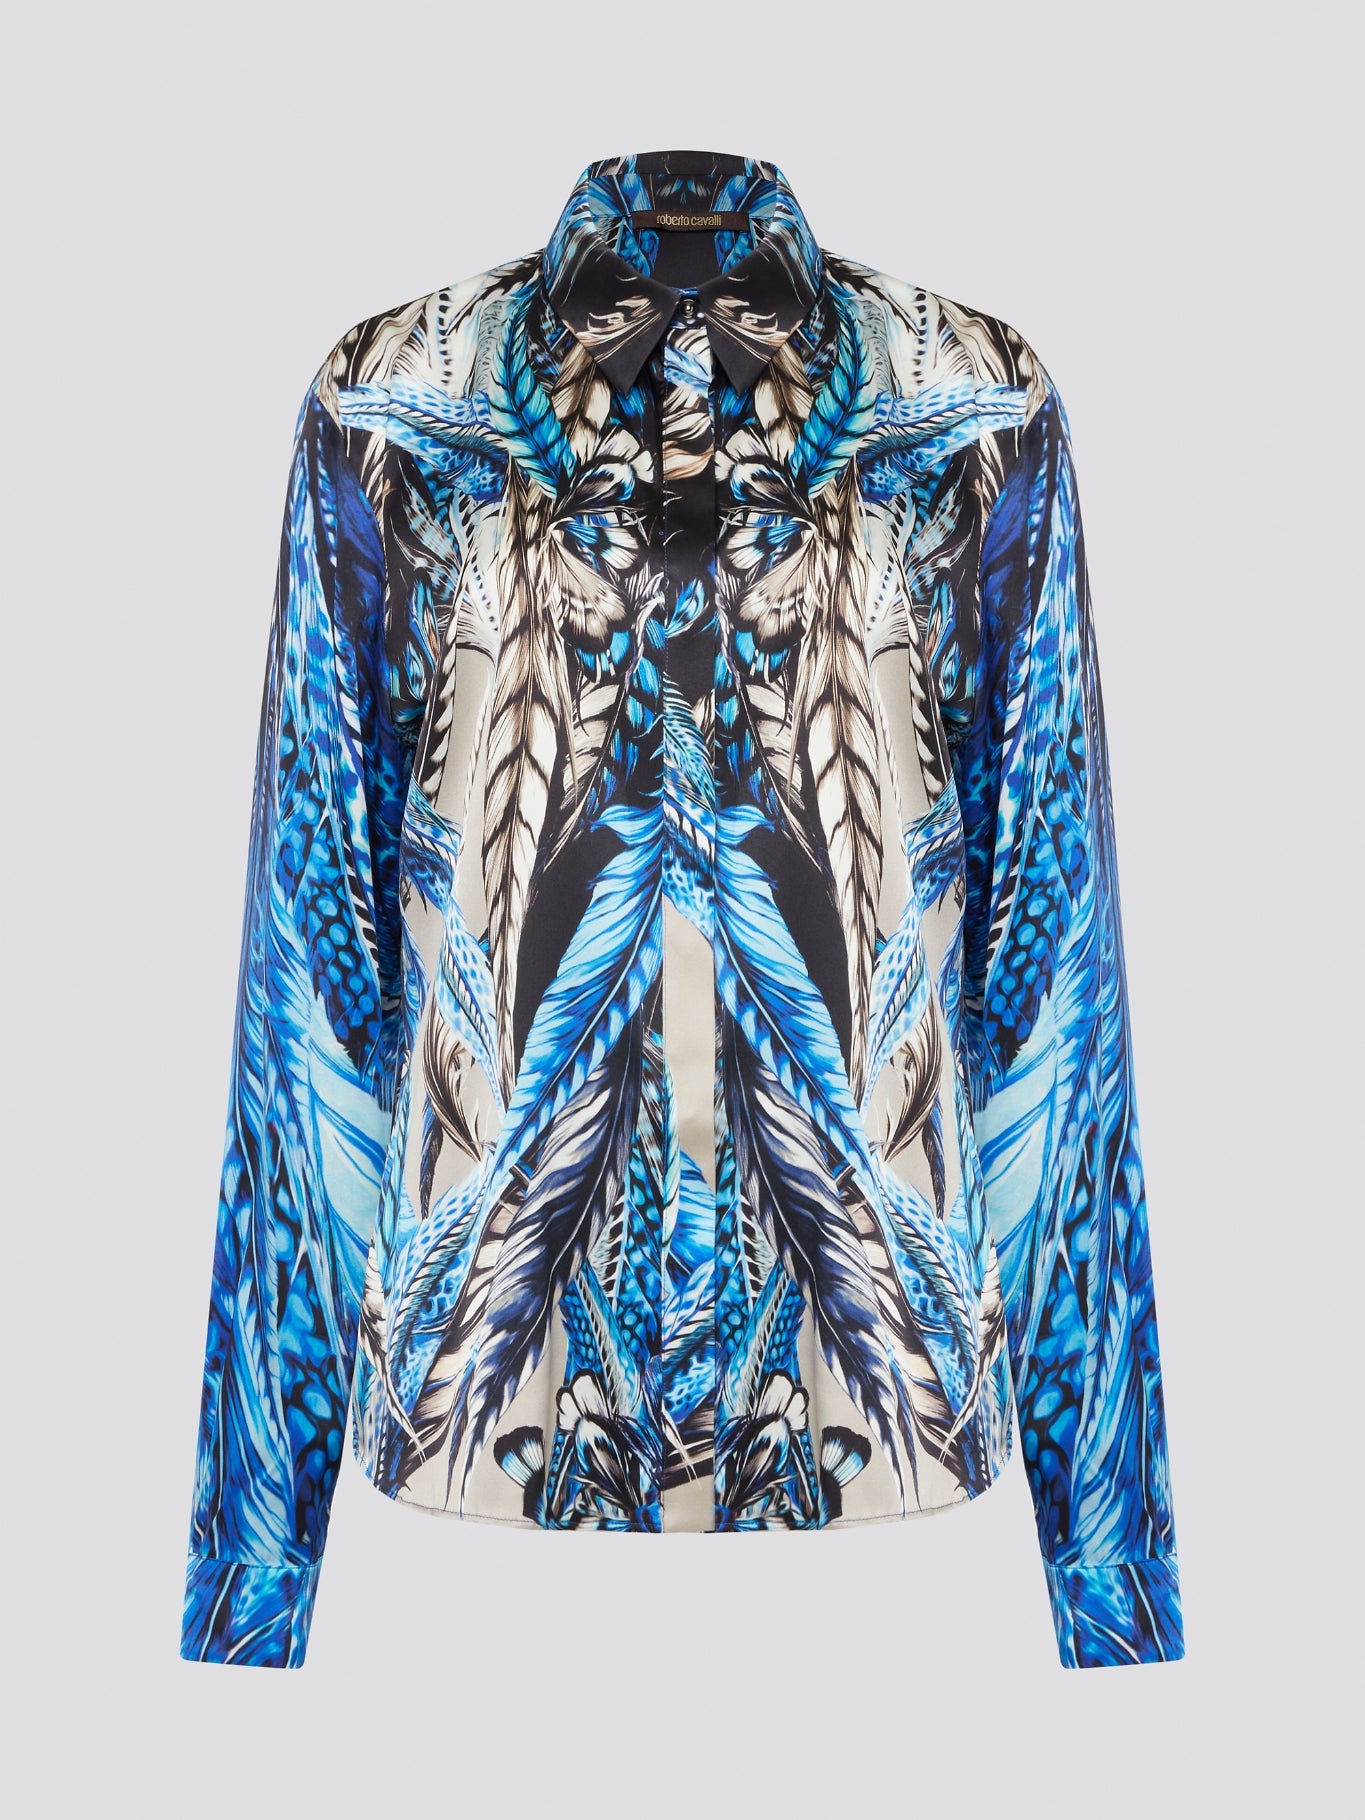 Elevate your wardrobe with the stunning Blue Printed Long Sleeve Blouse by Roberto Cavalli. Featuring a bold and striking print, this blouse is perfect for making a statement wherever you go. Crafted with exquisite attention to detail, this piece will add a touch of luxury and sophistication to any outfit.